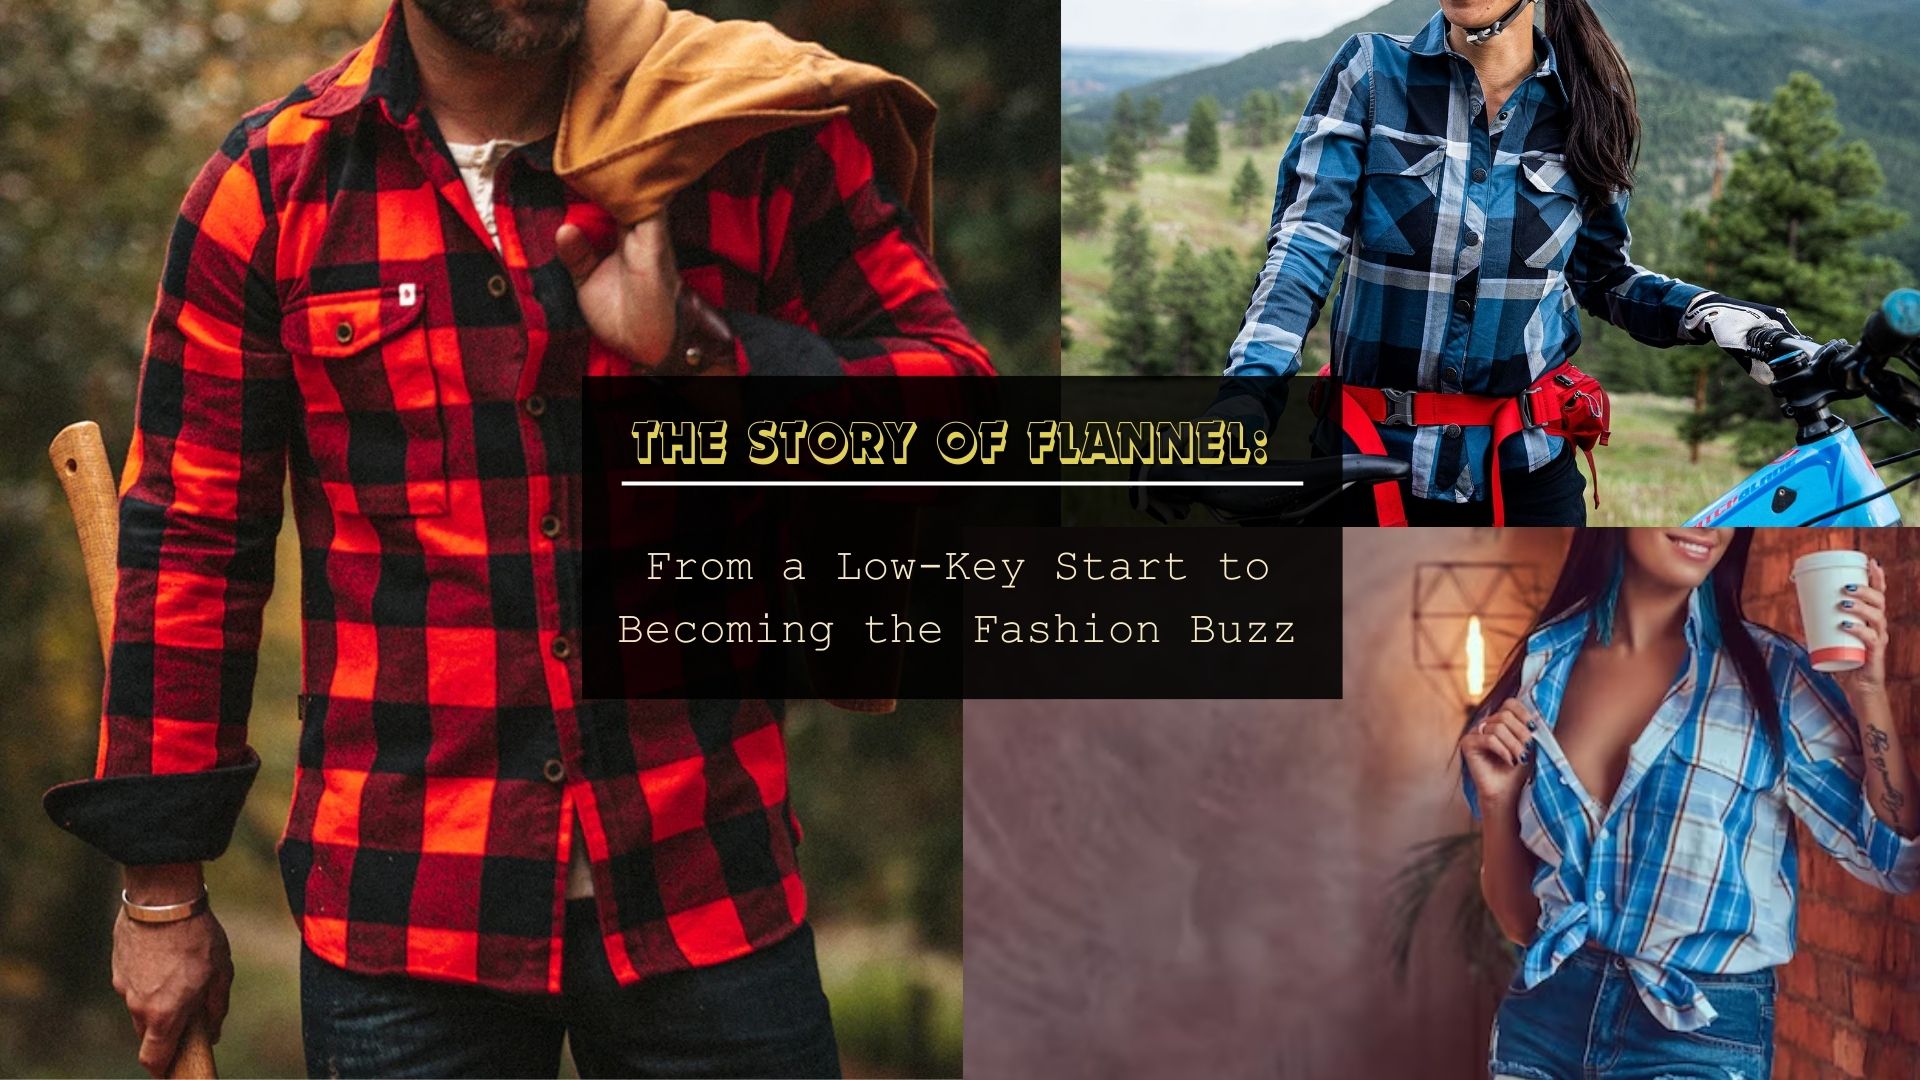 the story of flannel from a low-key start to becoming the fashion buzz